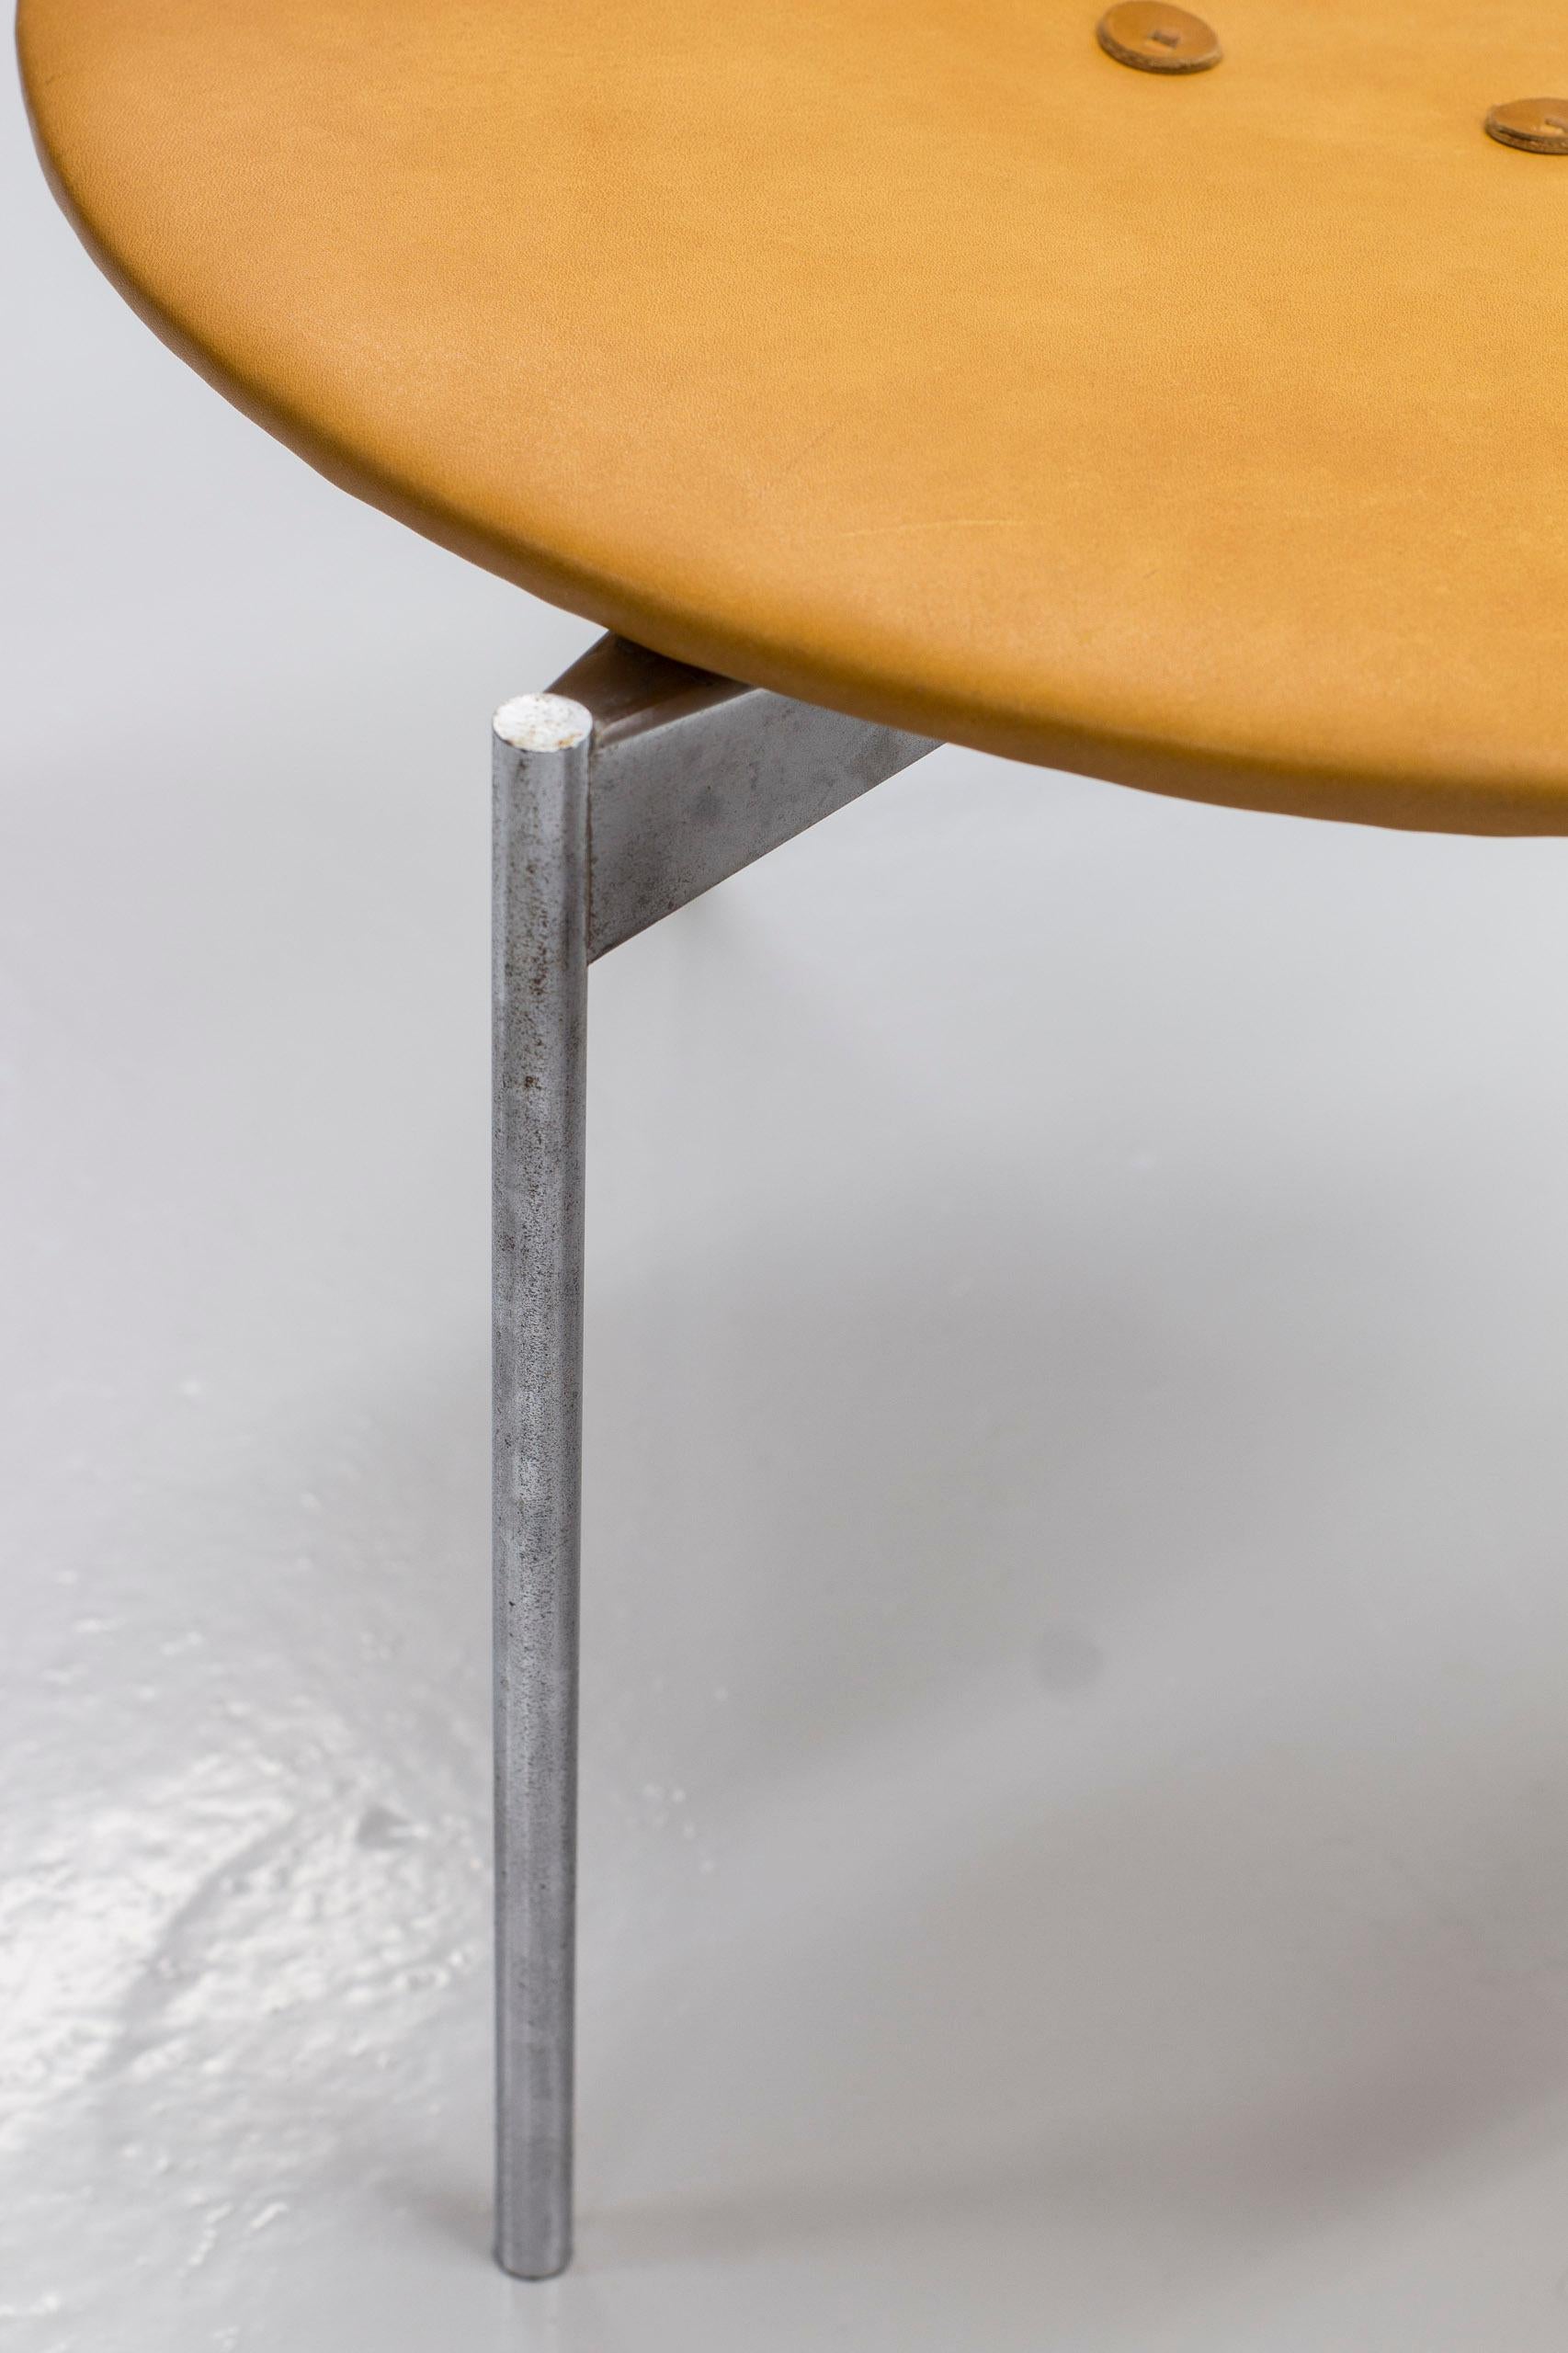 Mid-20th Century Leather and Steel Stools by Uno & Östen Kristiansson, Sweden, 1960s For Sale